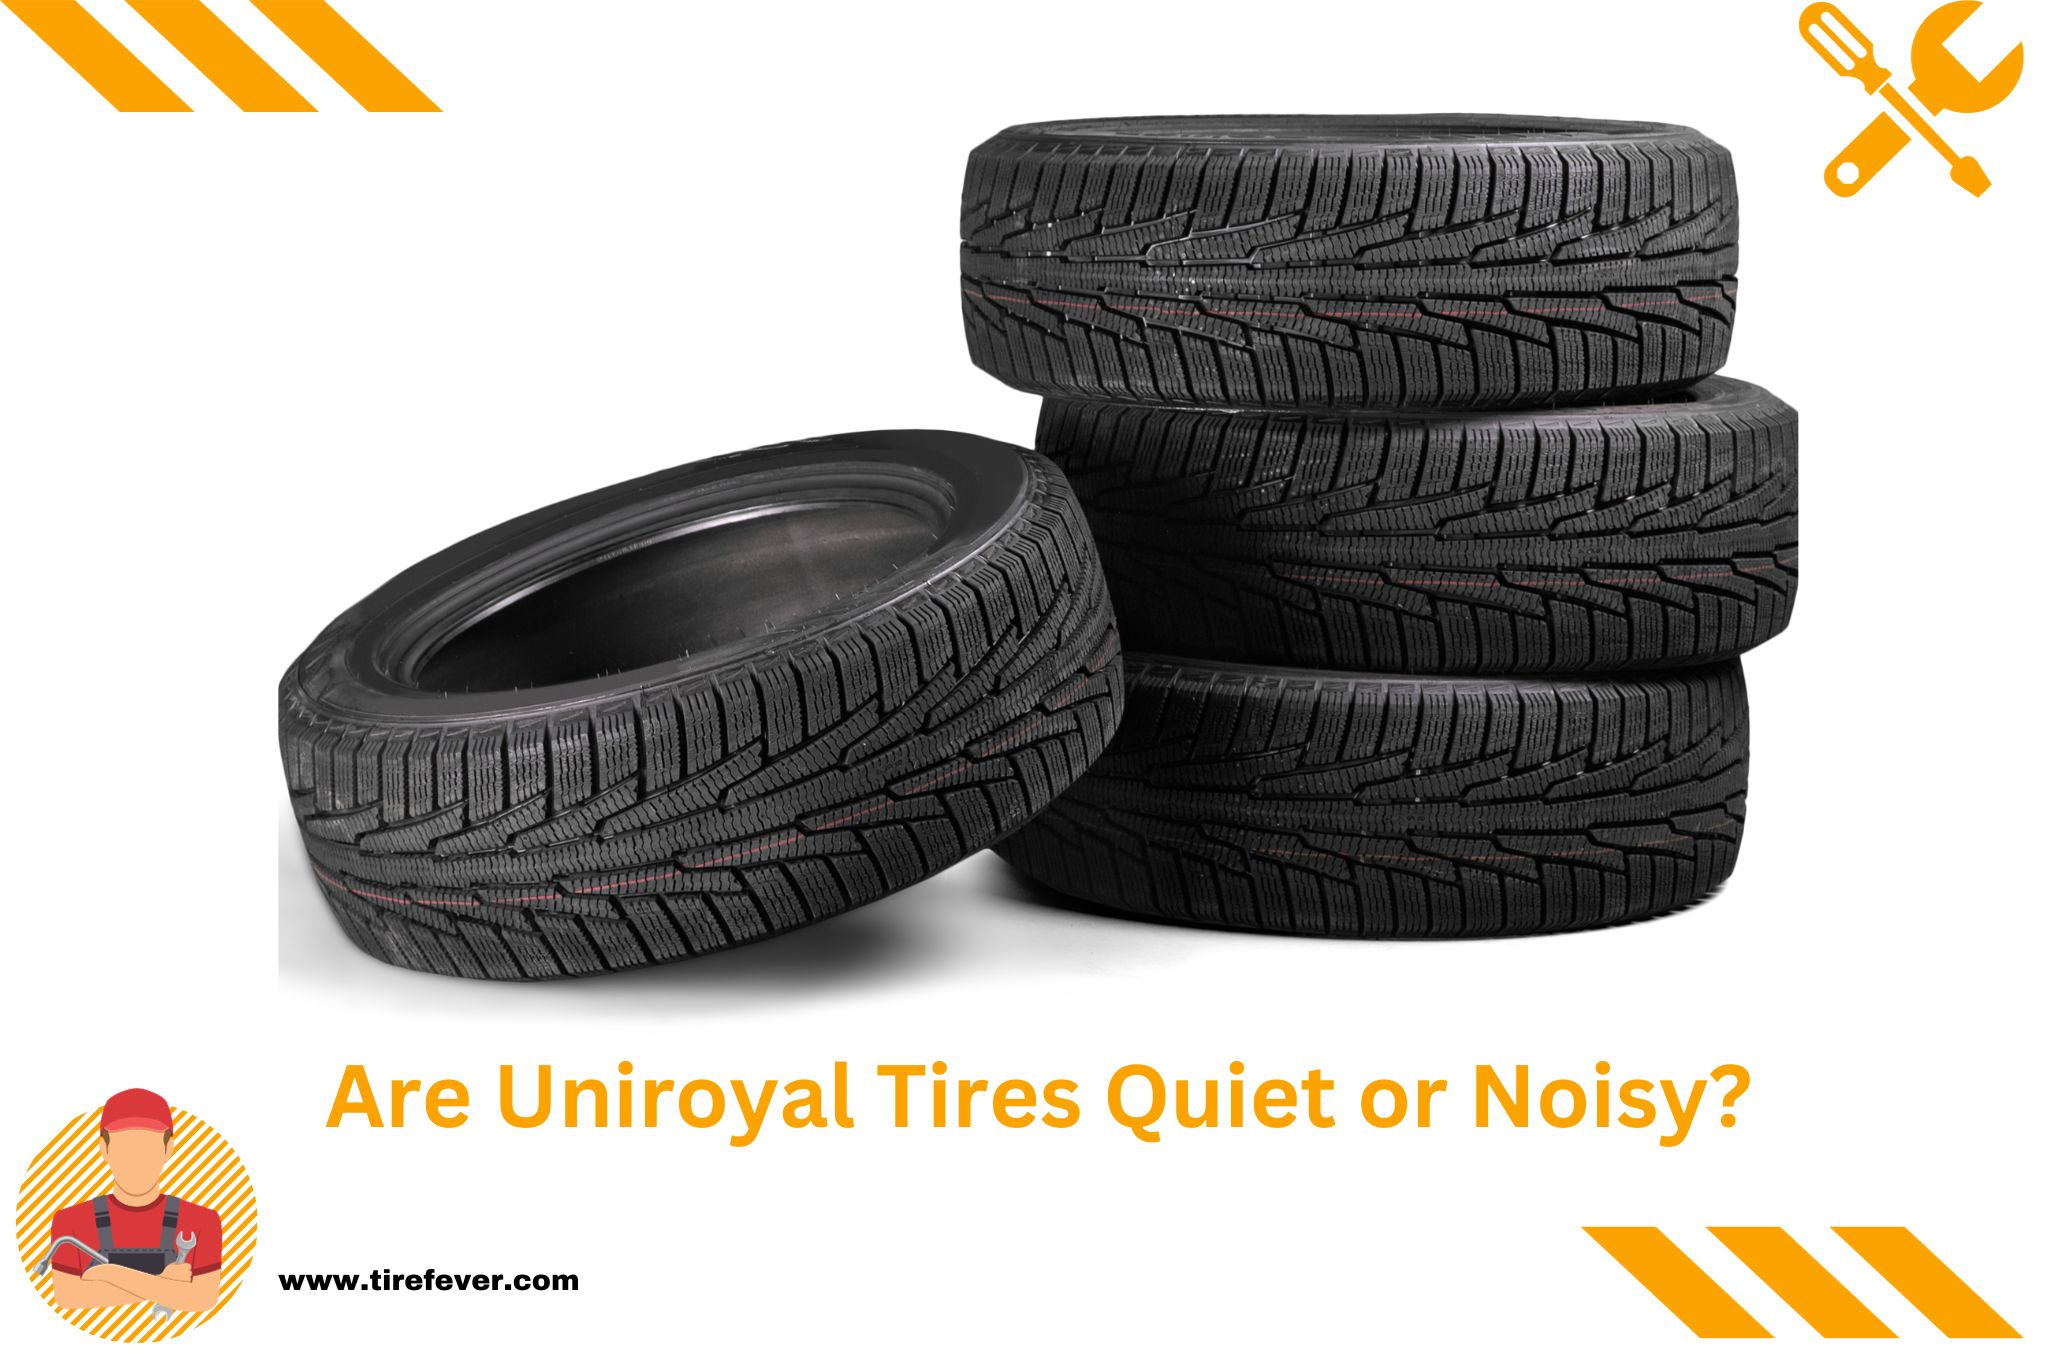 Are Uniroyal Tires Quiet or Noisy?